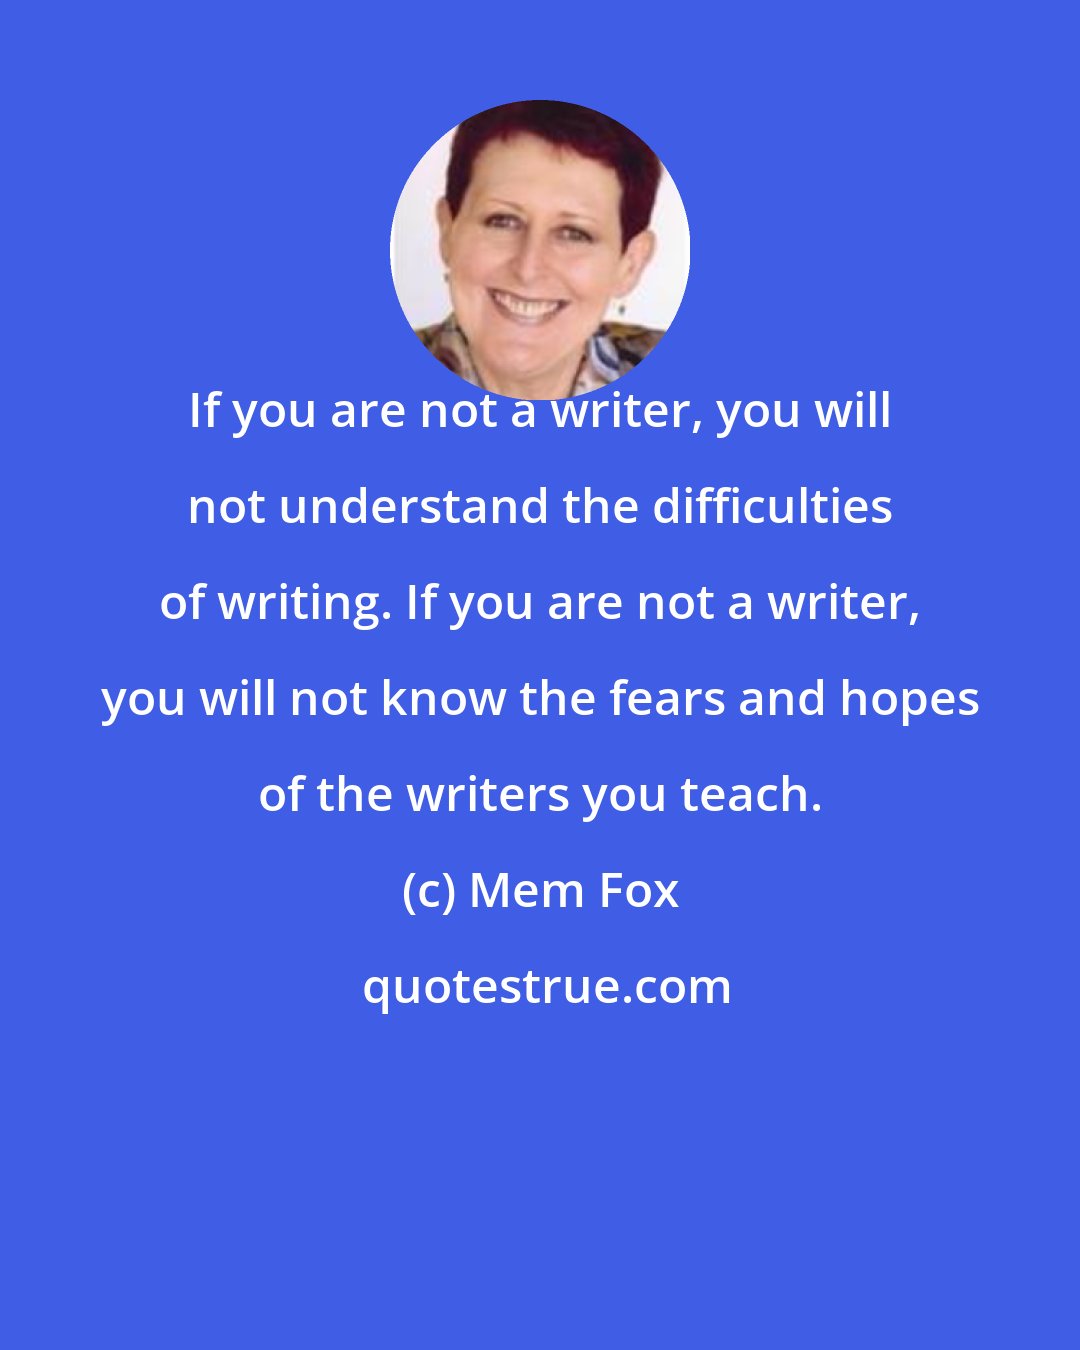 Mem Fox: If you are not a writer, you will not understand the difficulties of writing. If you are not a writer, you will not know the fears and hopes of the writers you teach.